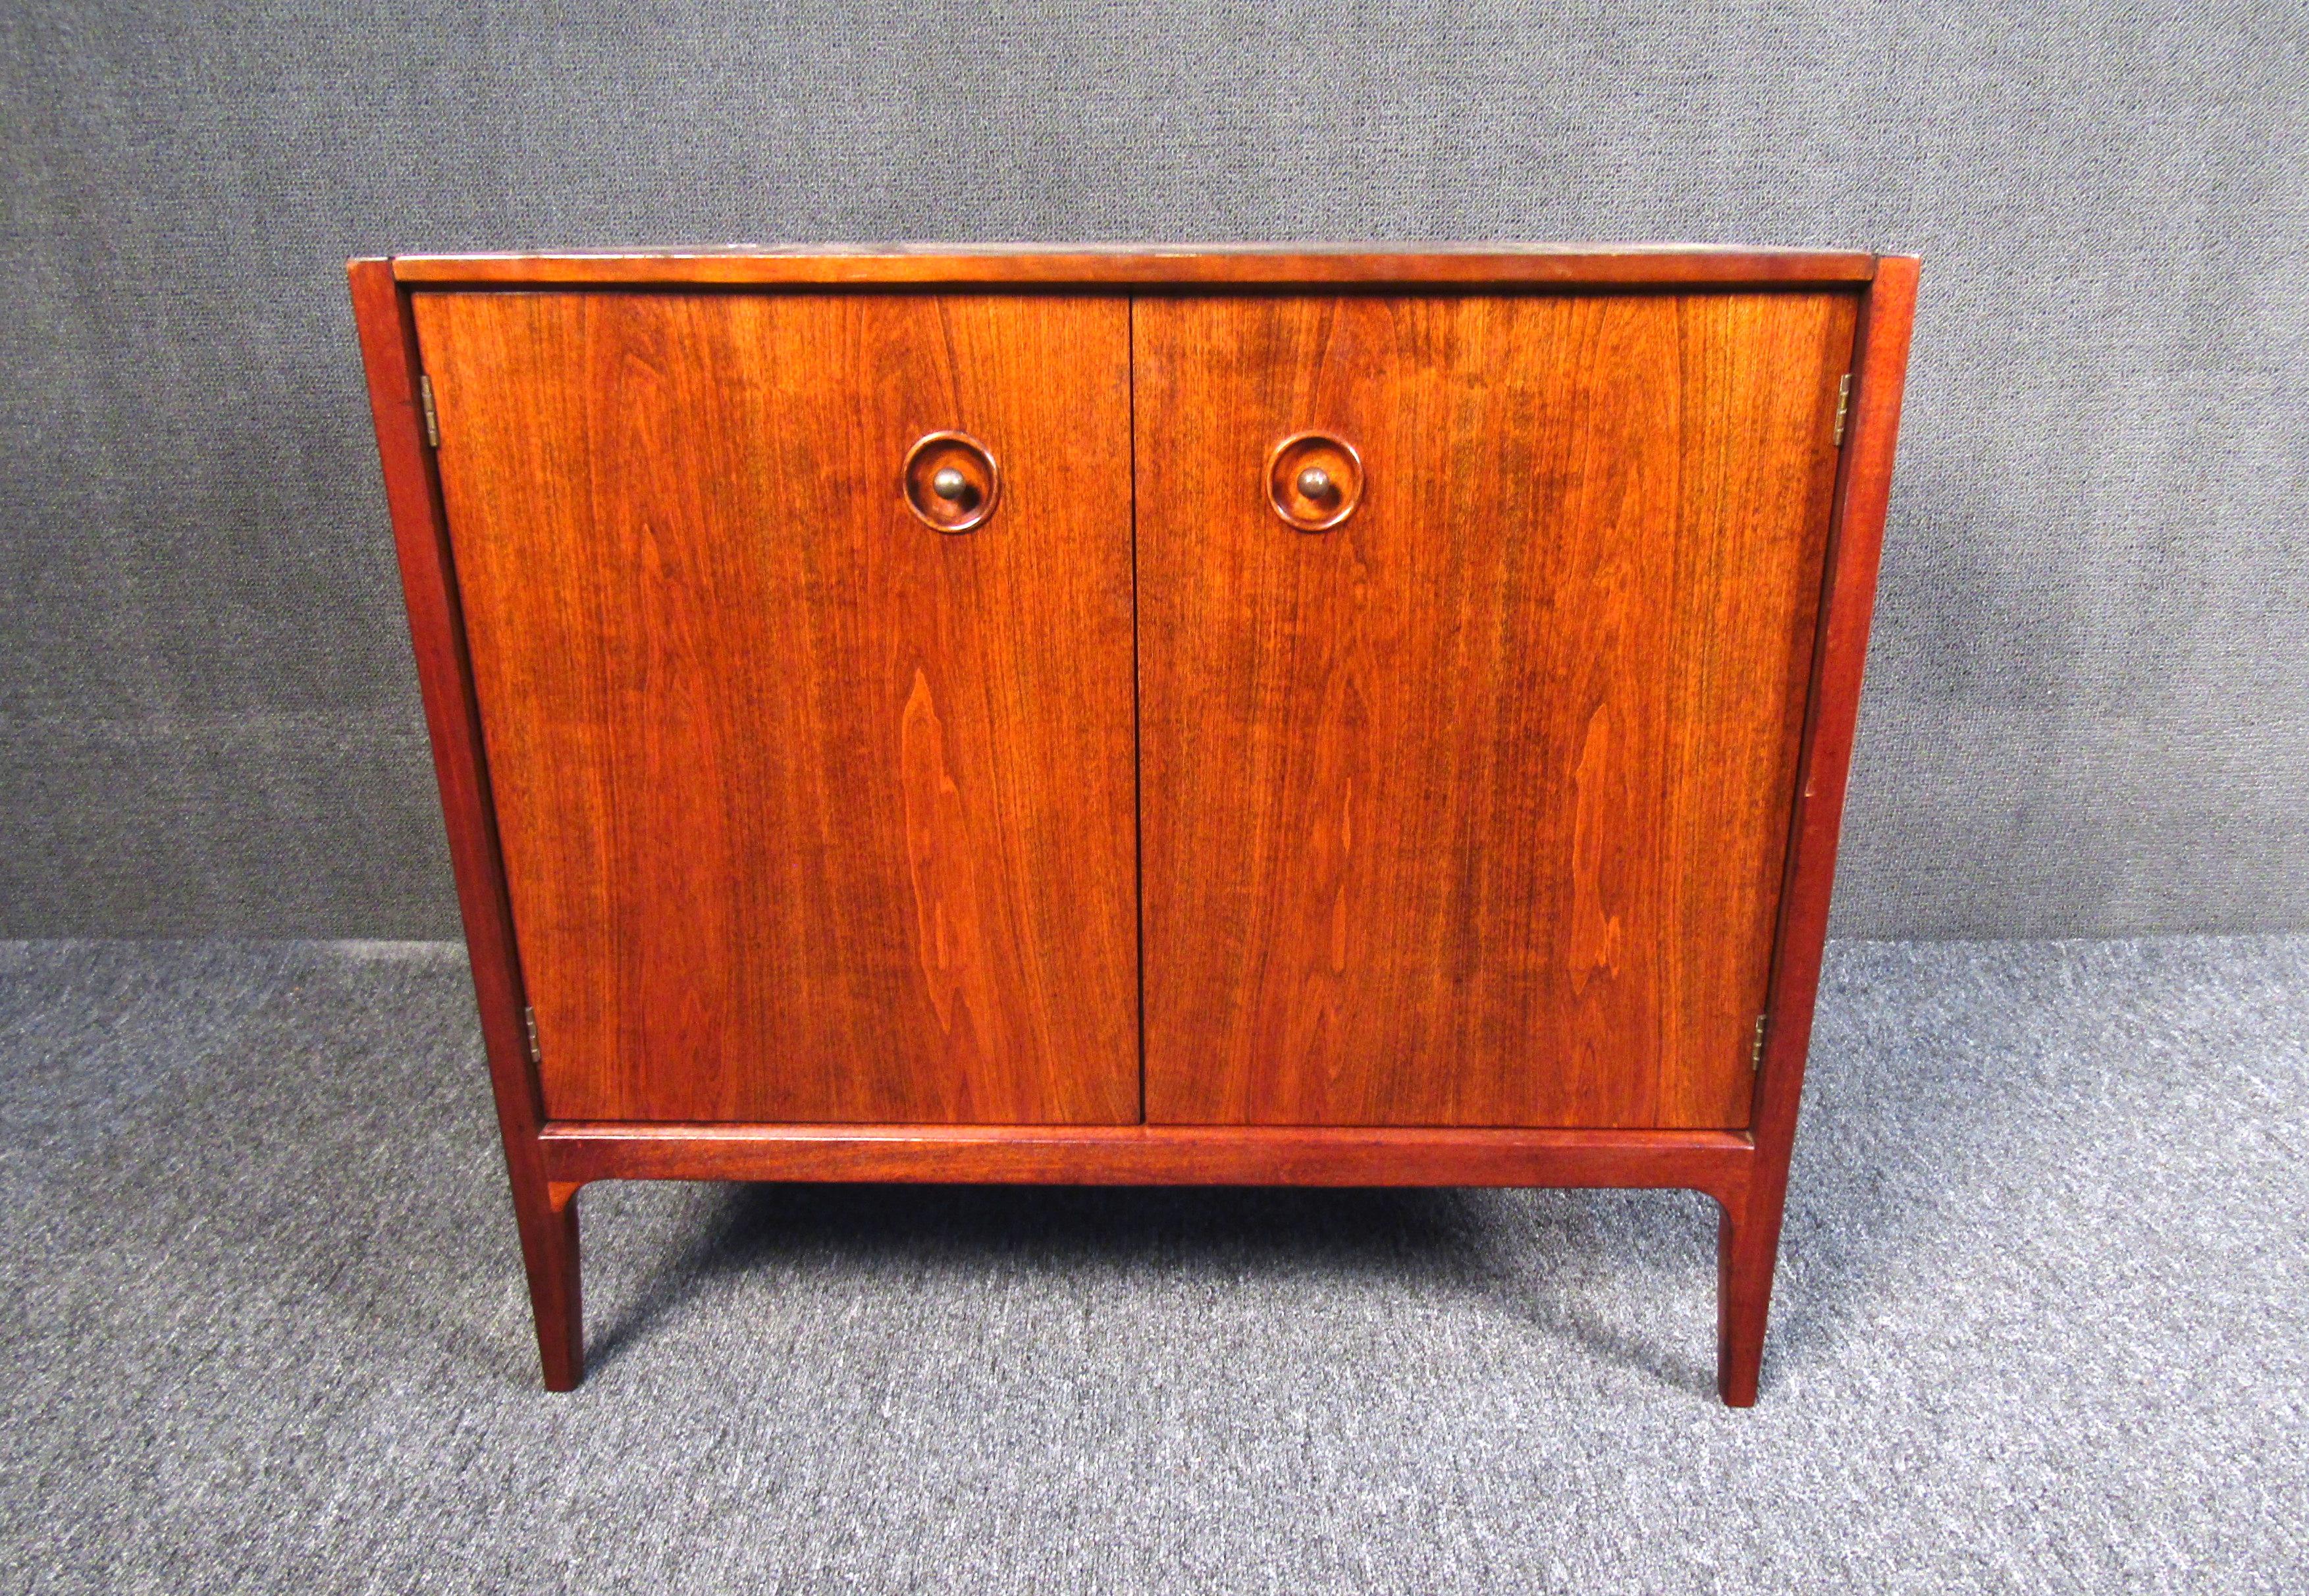 This gorgeous Mid-Century Modern side chest displays a rich walnut woodgrain and a quality design by Drexel. With plenty of storage for its size and compact design, this well-made American side chest is sure to be a great addition to any bedroom,